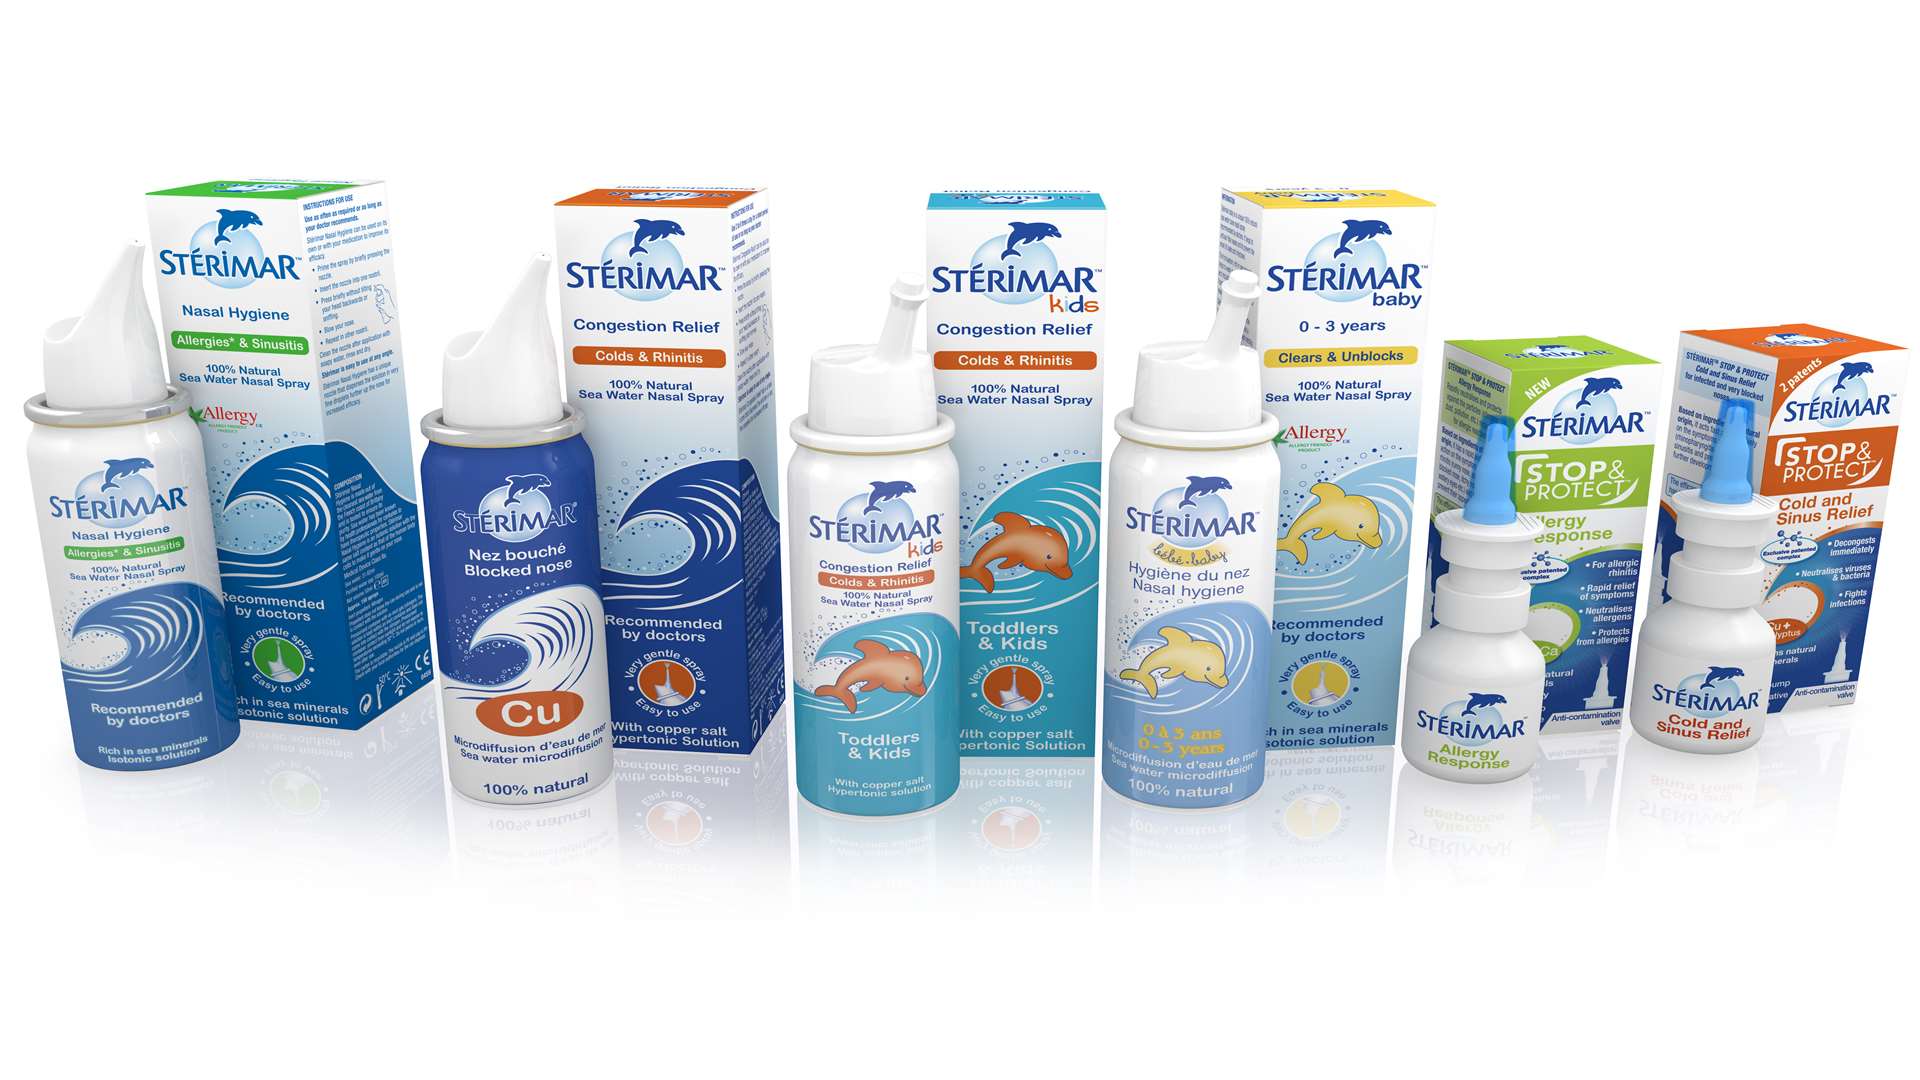 Church & Dwight has made and distributed 100 million bottles of its Stérimar sea water nasal spray